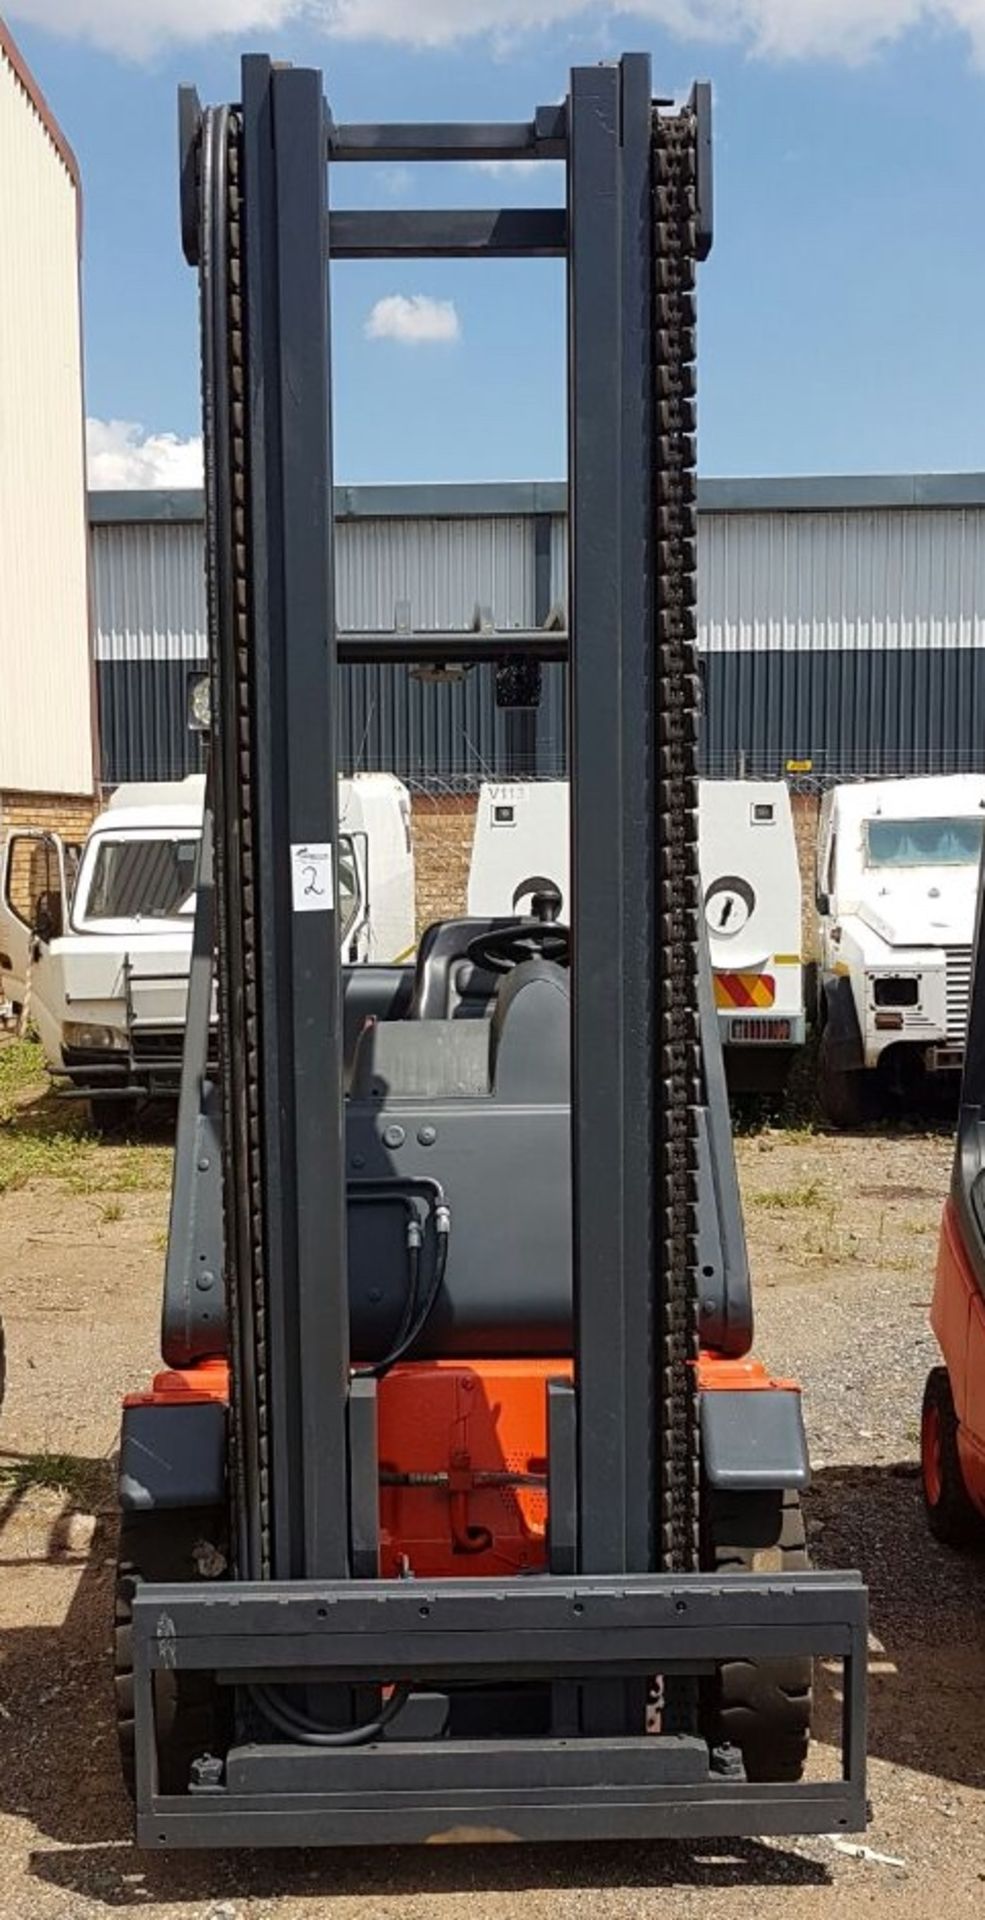 2008 LINDE H25T 2.5 TON GAS FORKLIFT (9,885 HOURS) C1X351W02114 - (JHB) - (STC)